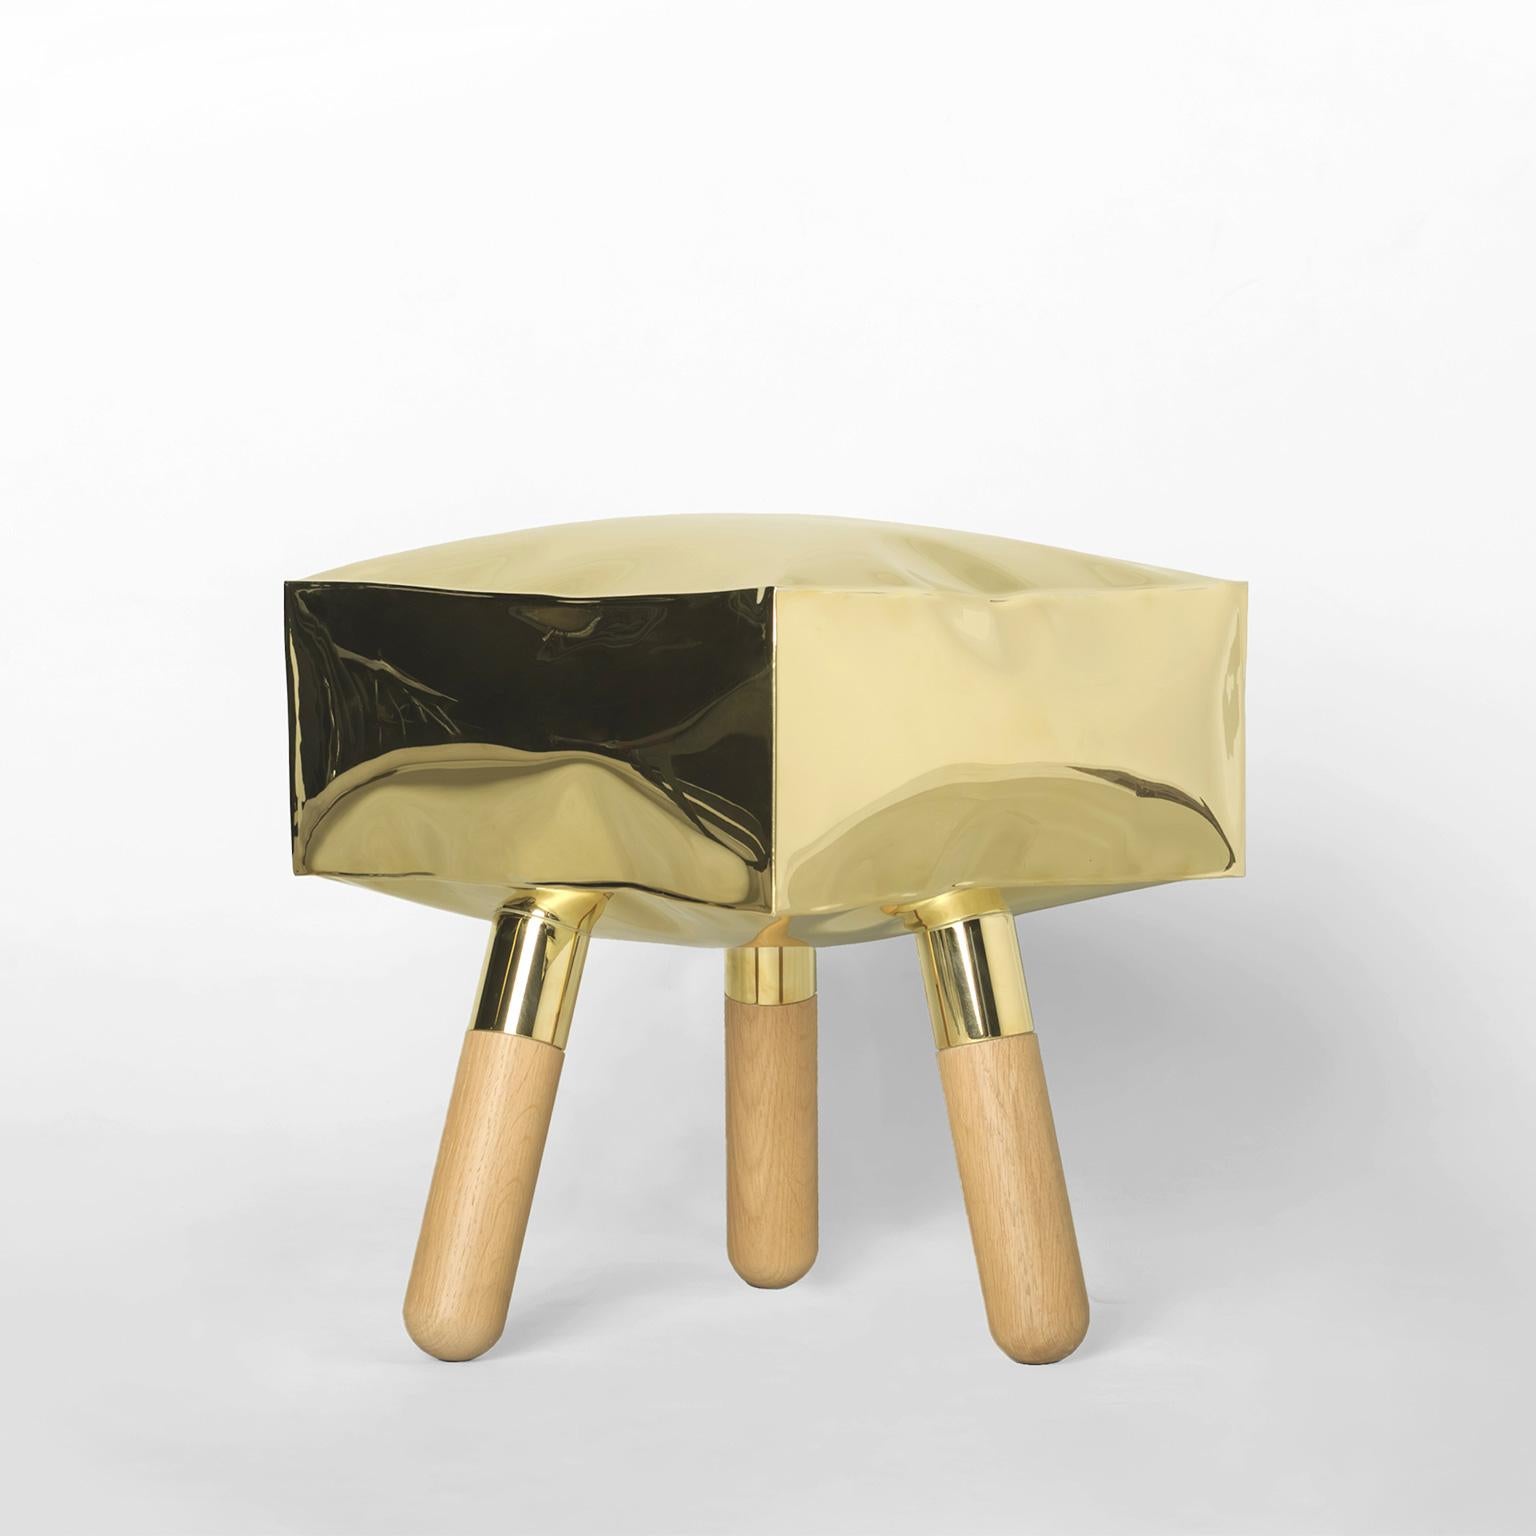 This 21st Century brass stool is a product of Italian craftmanship, the unique effect is created by the expansion of ice within the seating. It is manufactured in a limited edition of 15 signed and progressively numbered examples. The stool is part